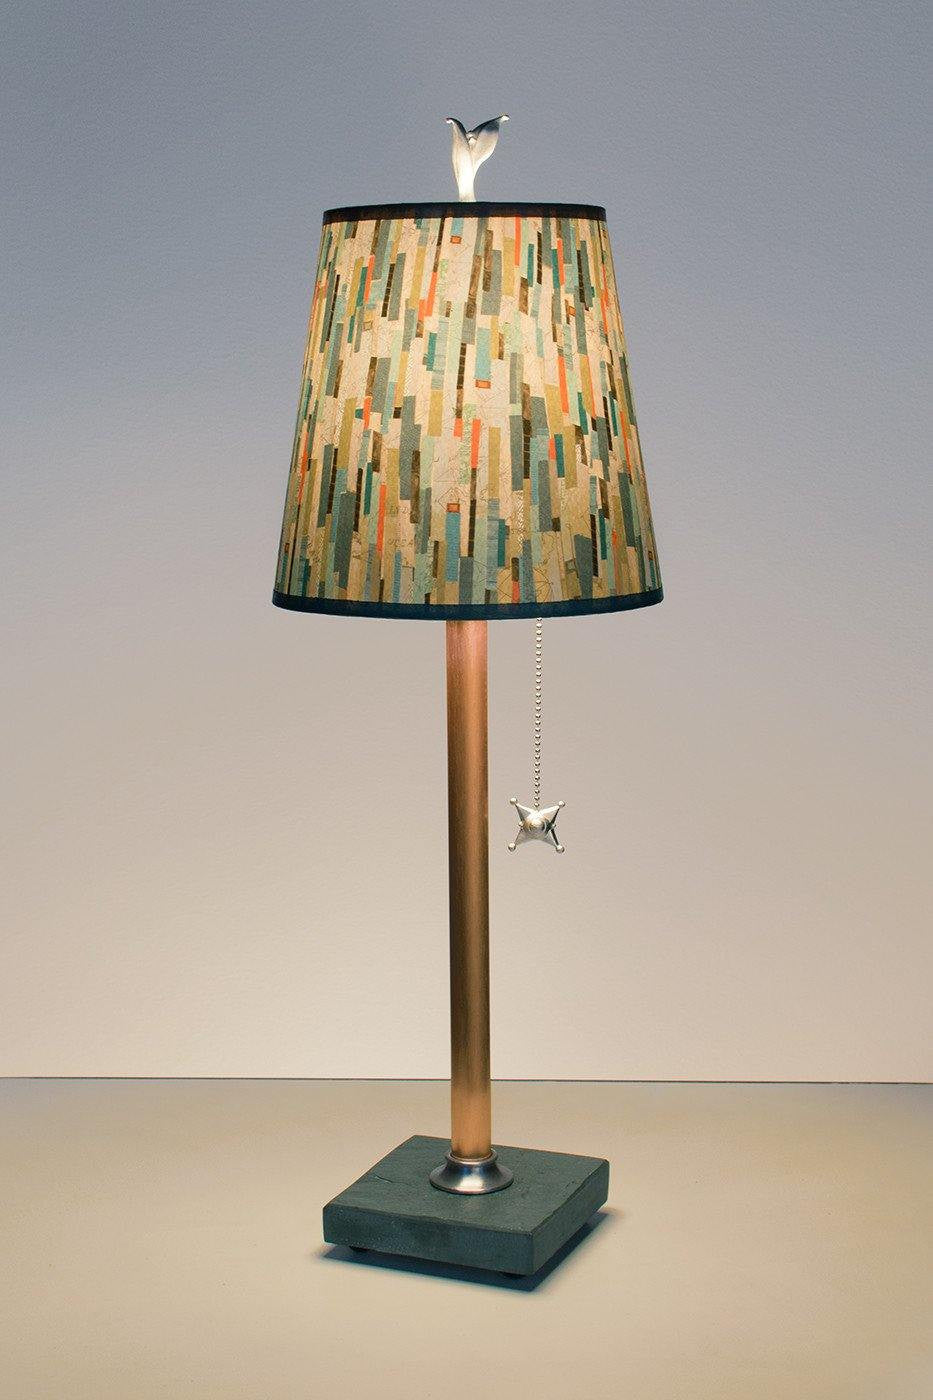 Copper Table Lamp on Vermont Slate Base with Small Drum Shade in Papers Lit